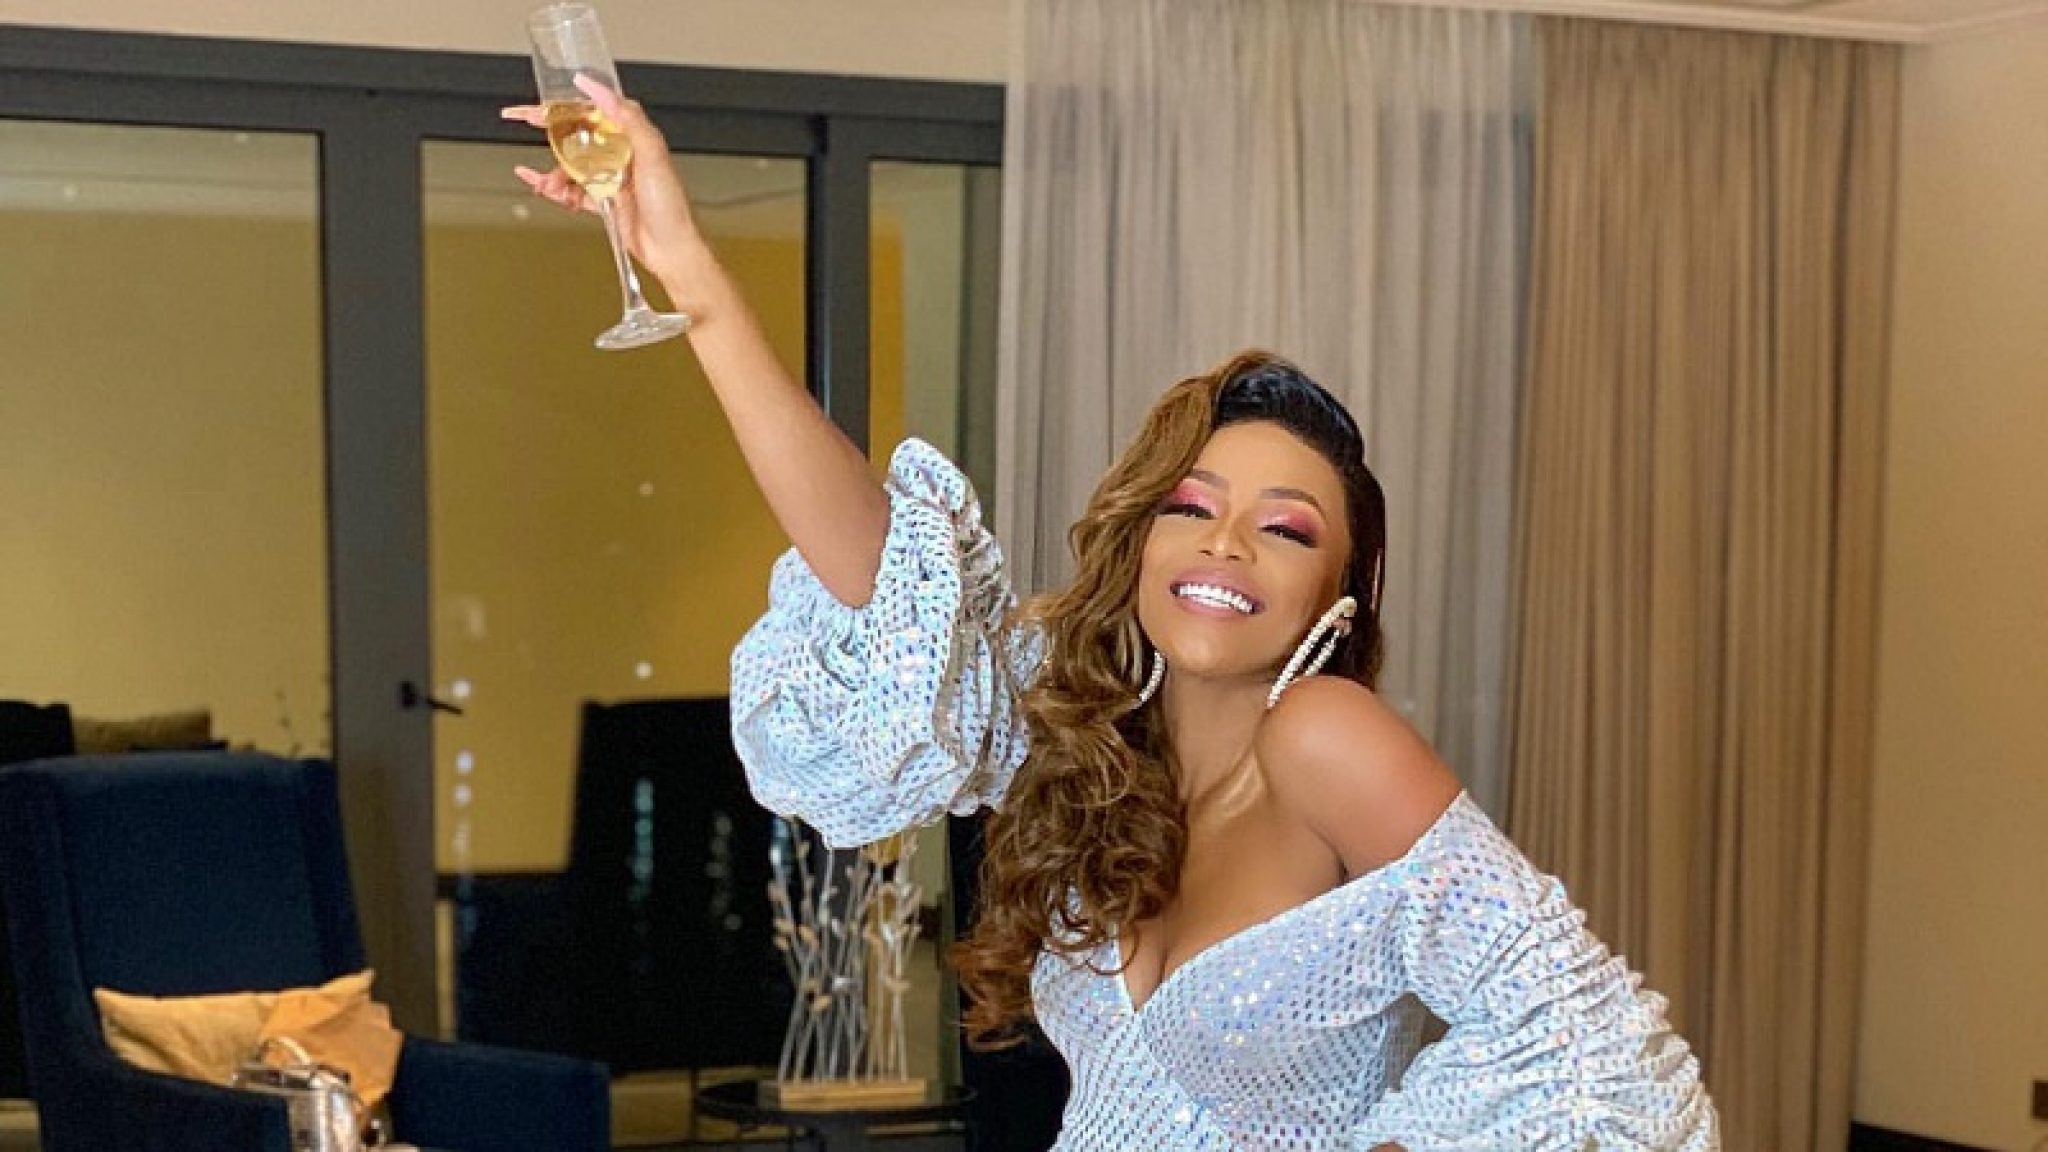 Bonang Matheba Wore Pajamas With A Live Party & Champagne For Her 33th